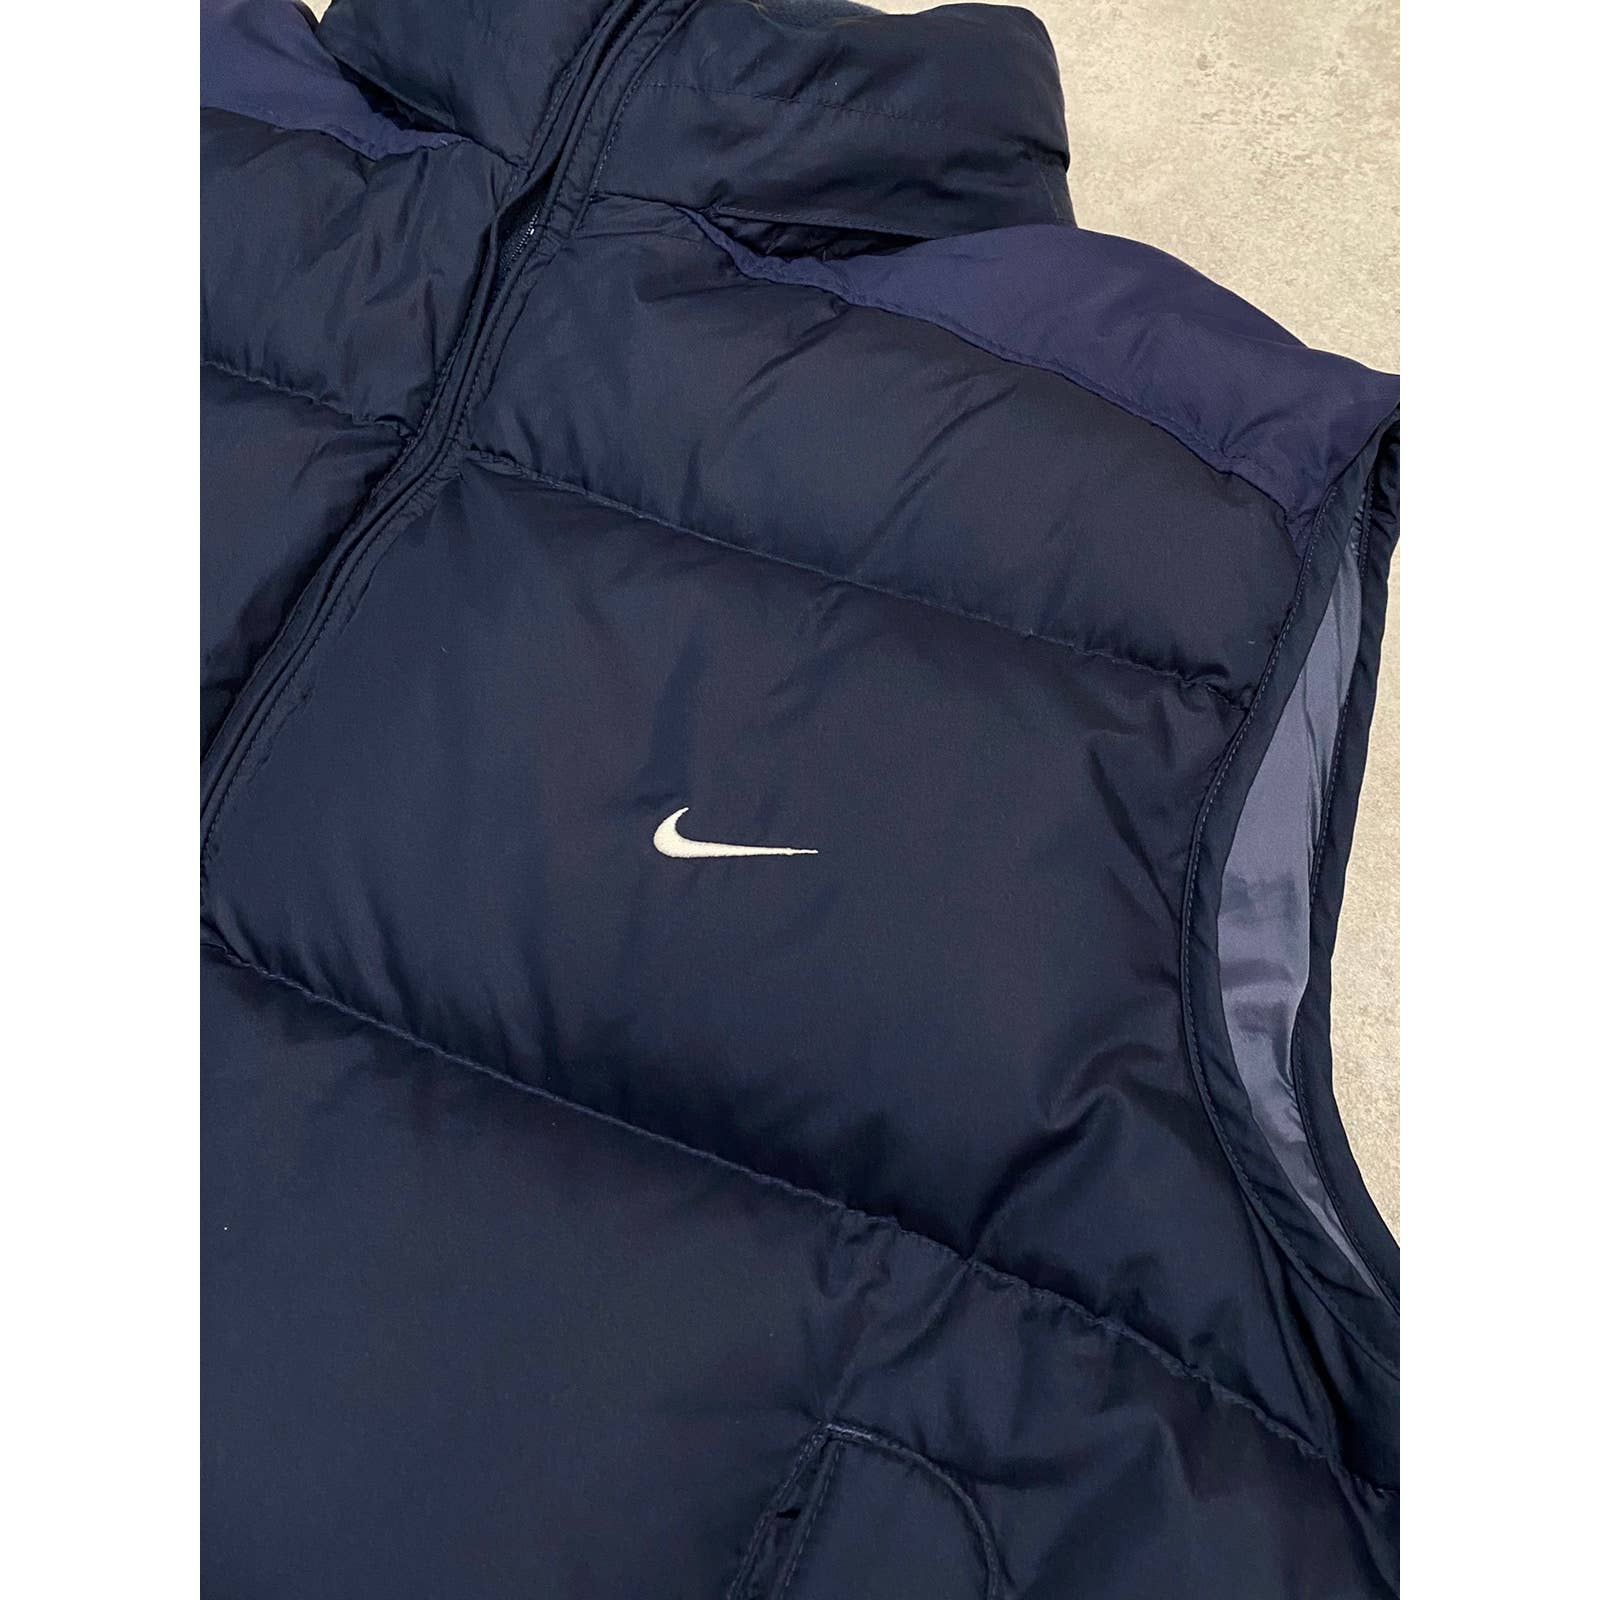 Nike vintage navy puffer vest small swoosh 2000s – Refitted